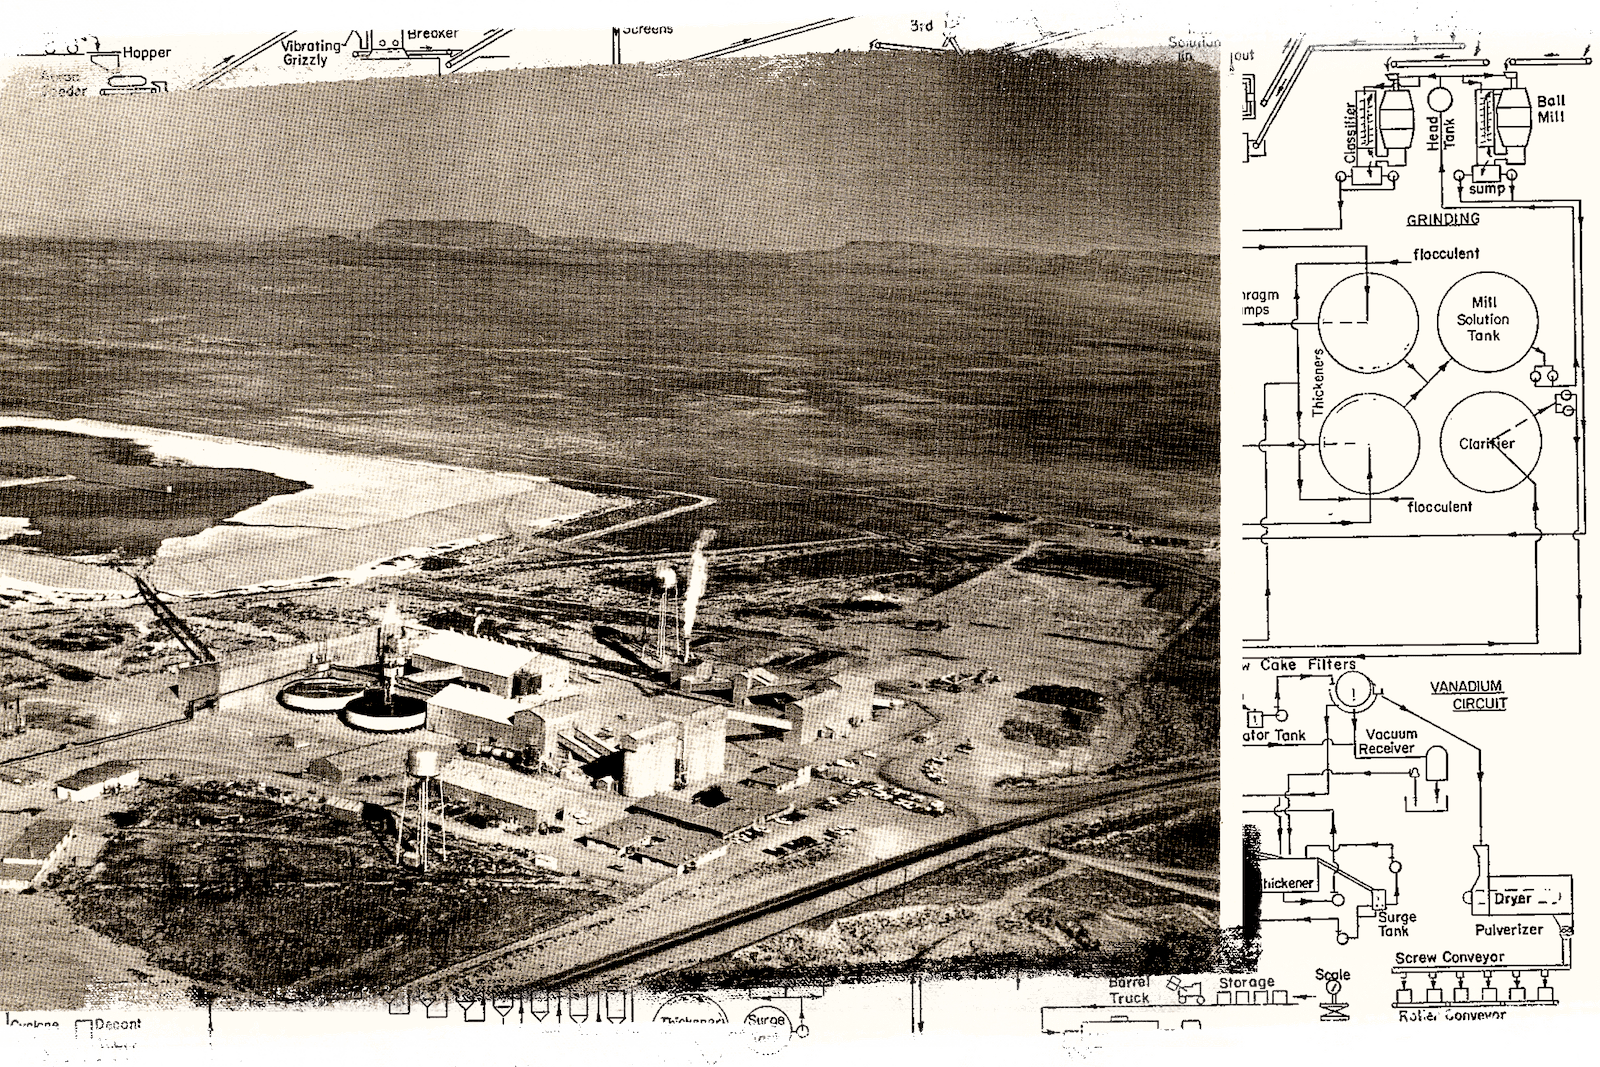 A dated image of the Homestake mine.